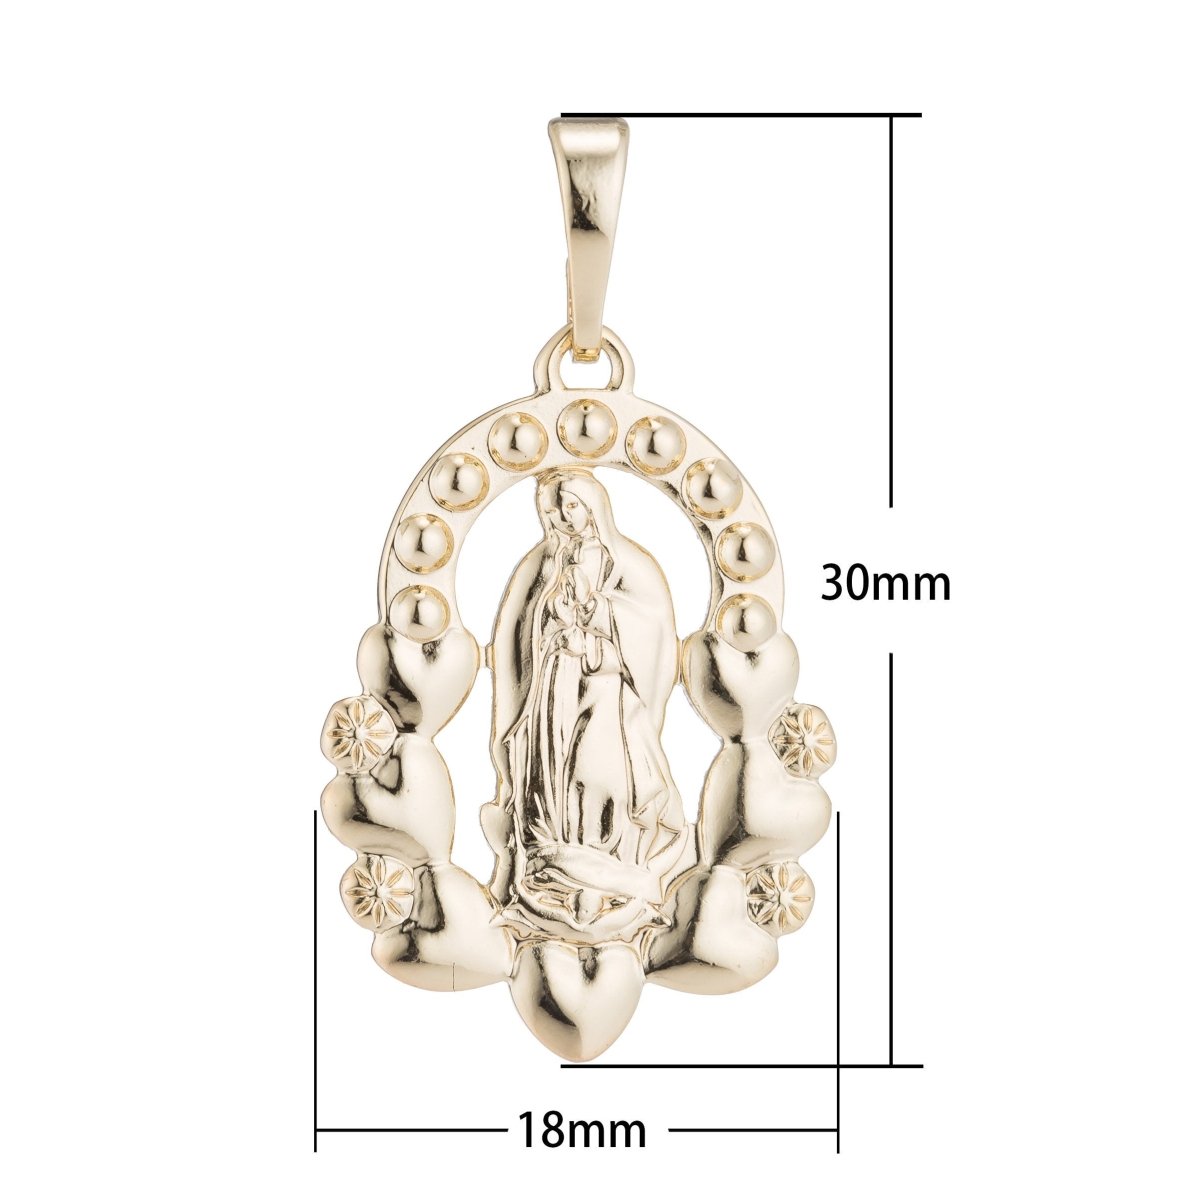 Gold Mother Mary, Holy, Virgin, Heart, Love, Pray for Us, Novena, Rosary, Necklace Pendant Charm Bead Bails Findings for Jewelry Making H-471 - DLUXCA